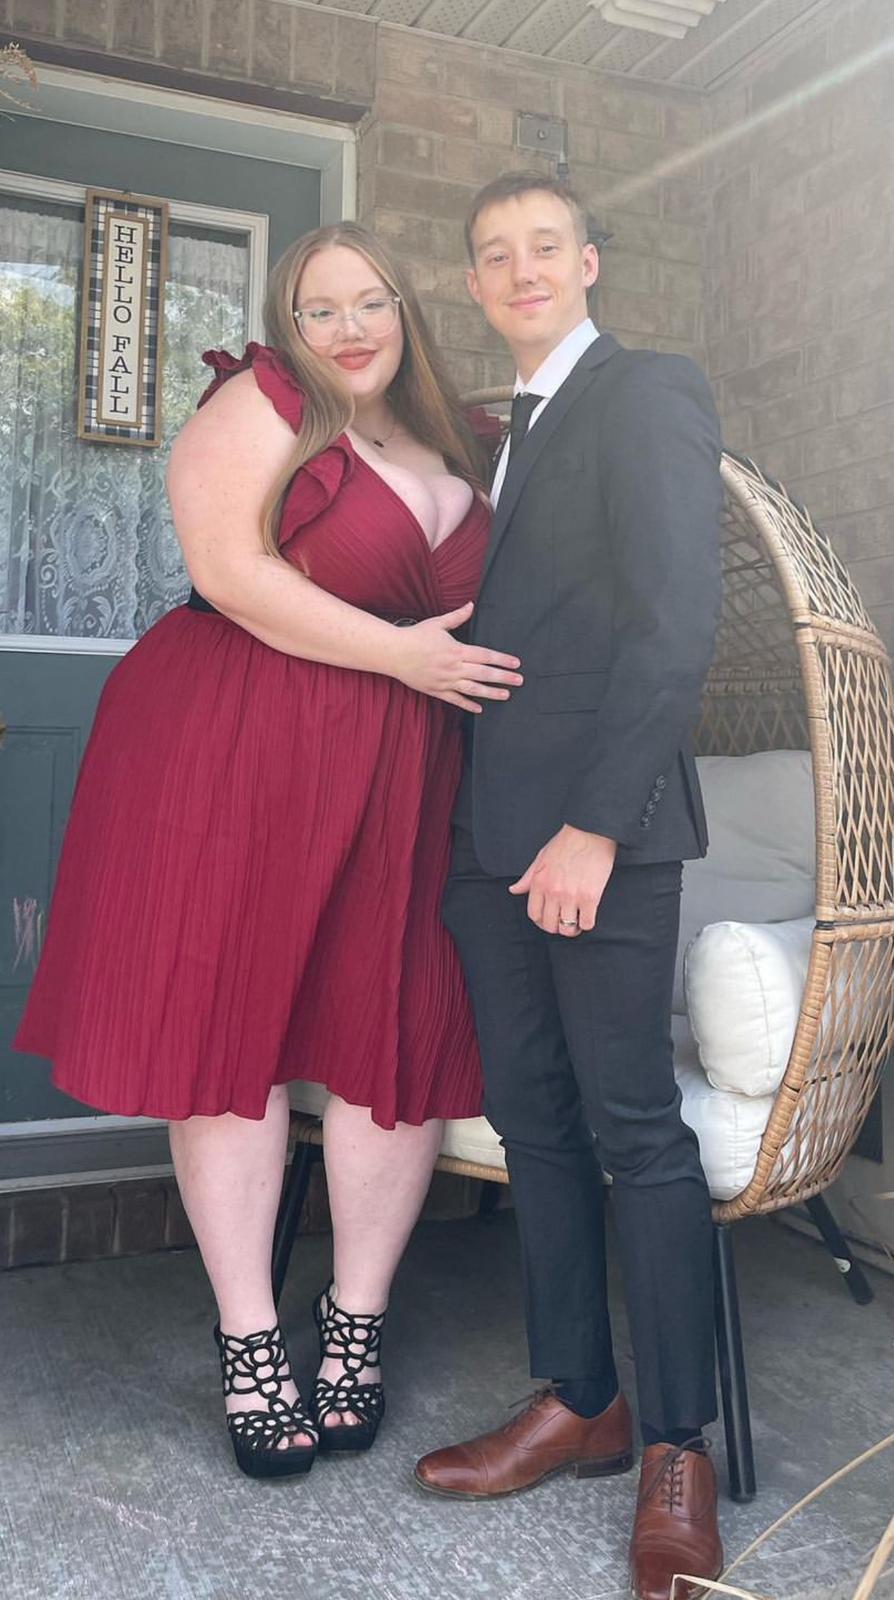 Man Mocked For Being With 252 LB Woman, Has The Perfect Response To Shut Haters Up